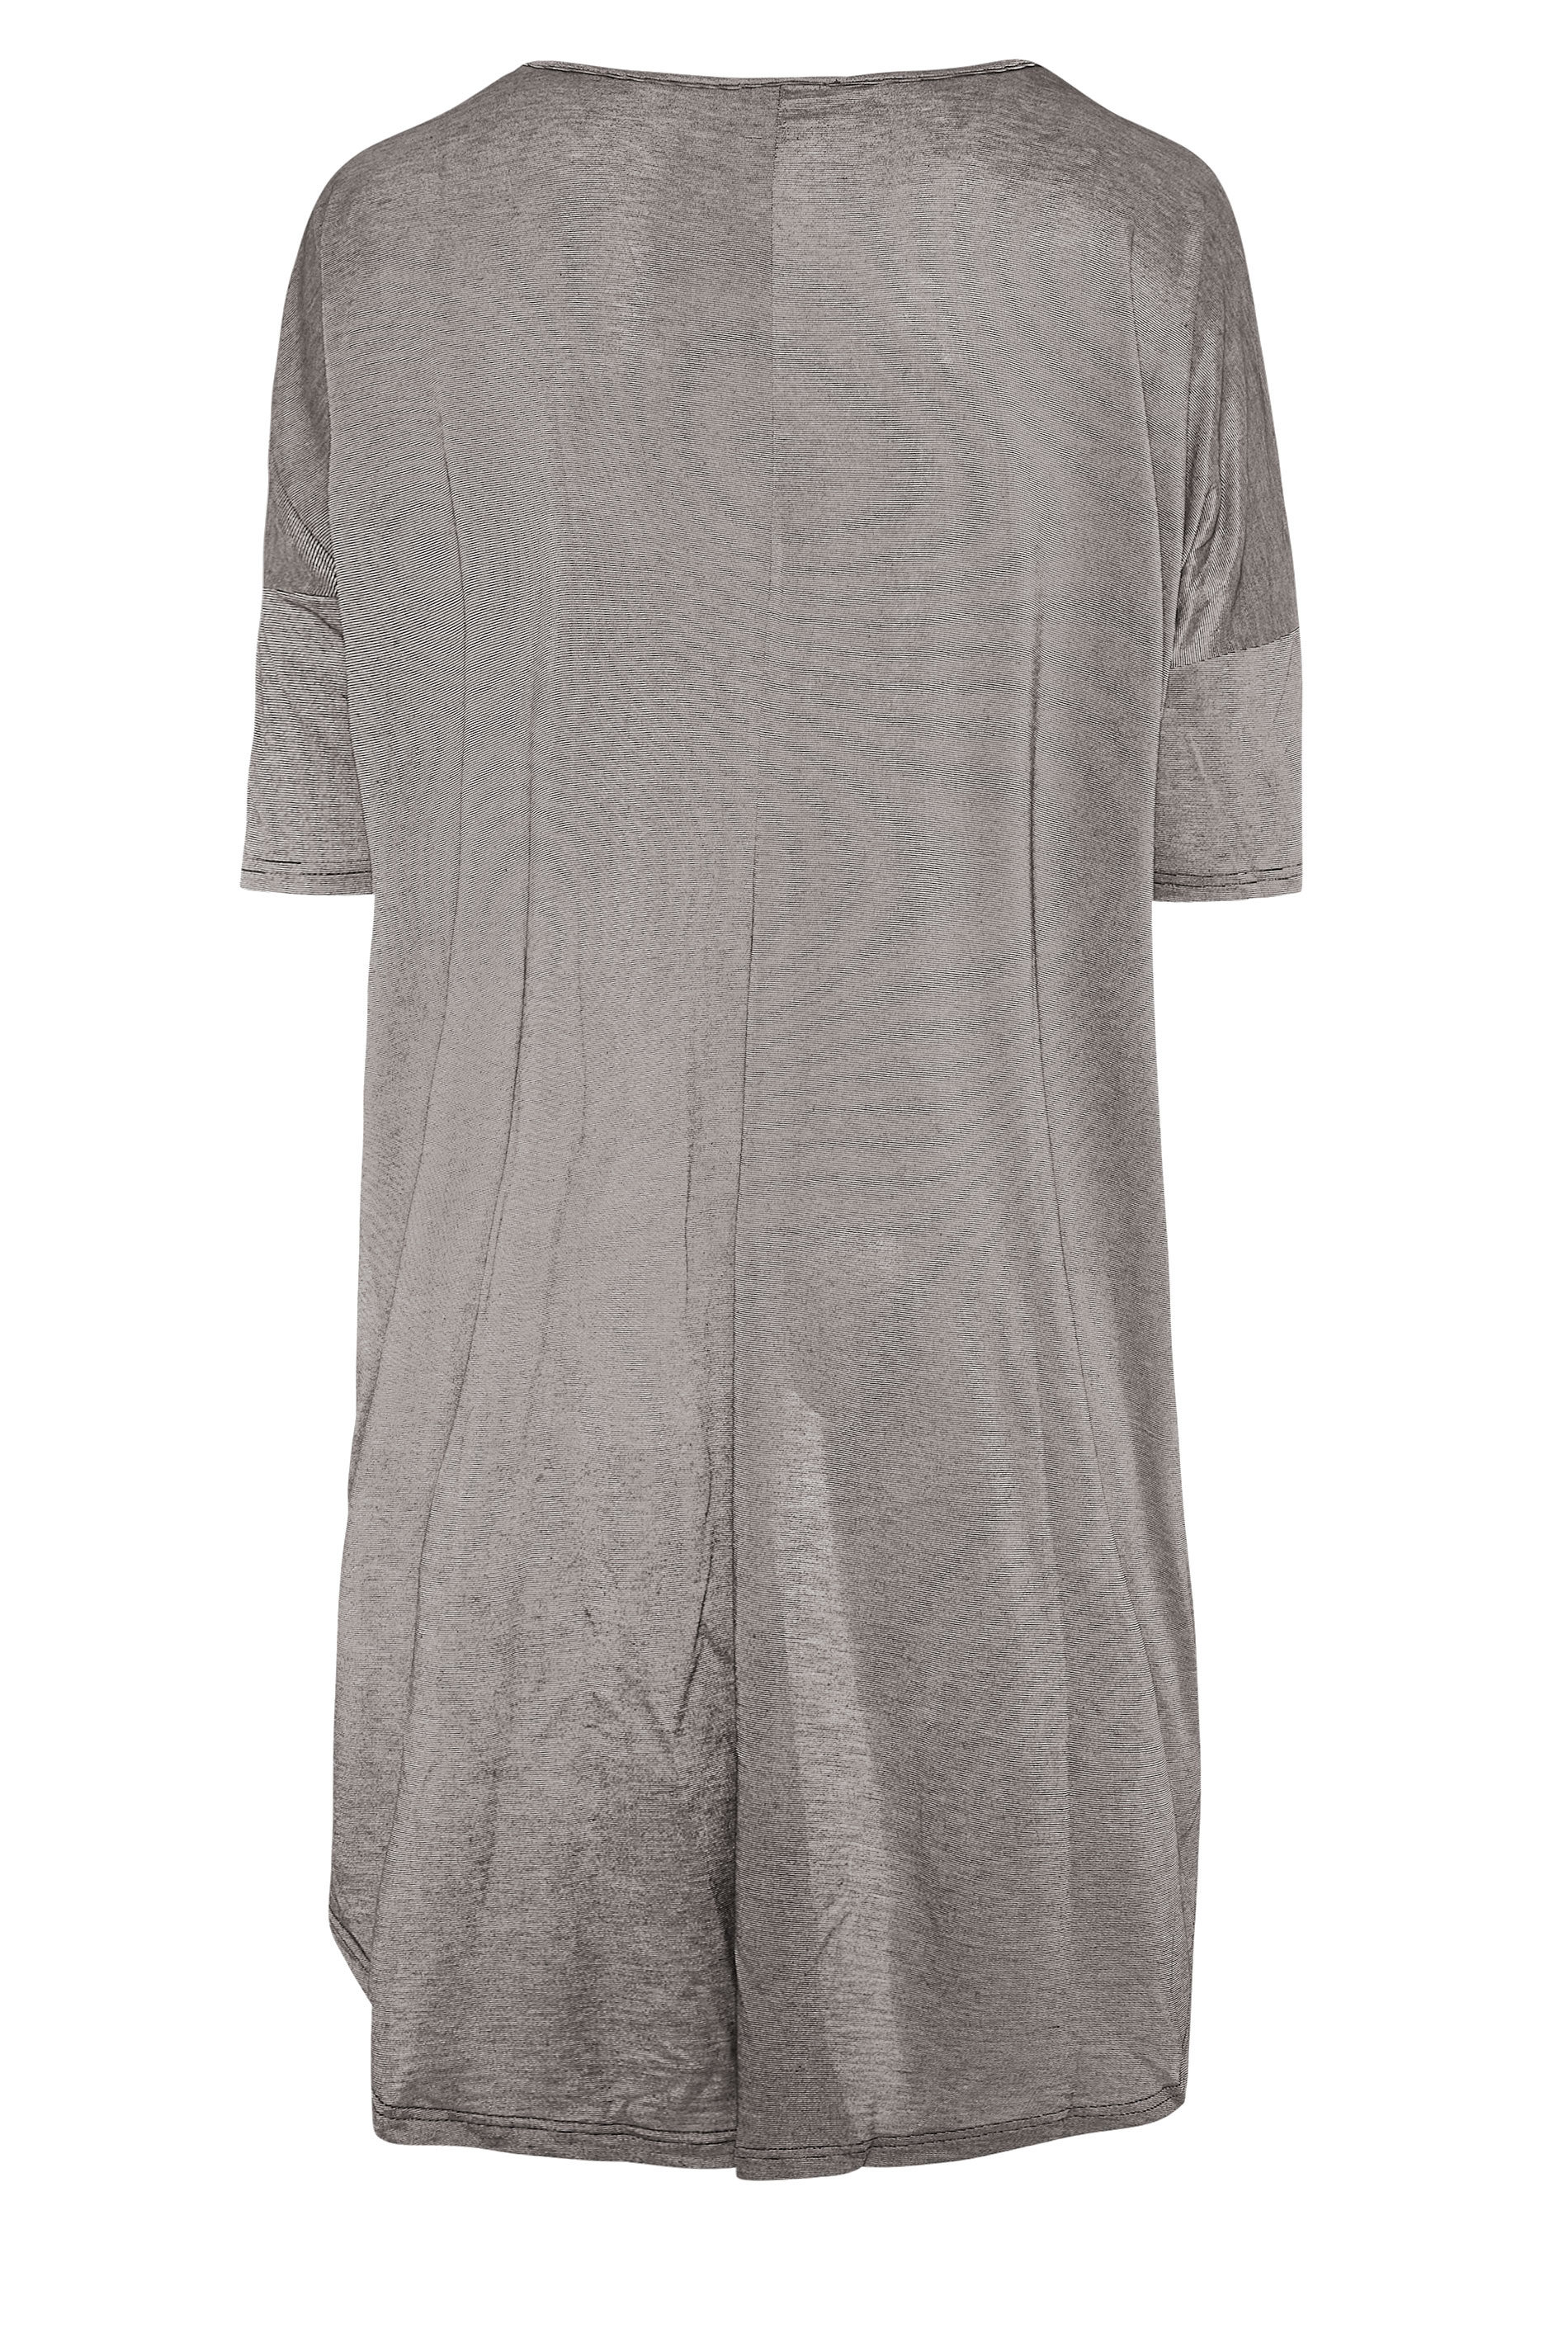 Grande taille  Tops Grande taille  T-Shirts | Curve Silver Metallic Longline Dipped Hem T-Shirt - UY89294